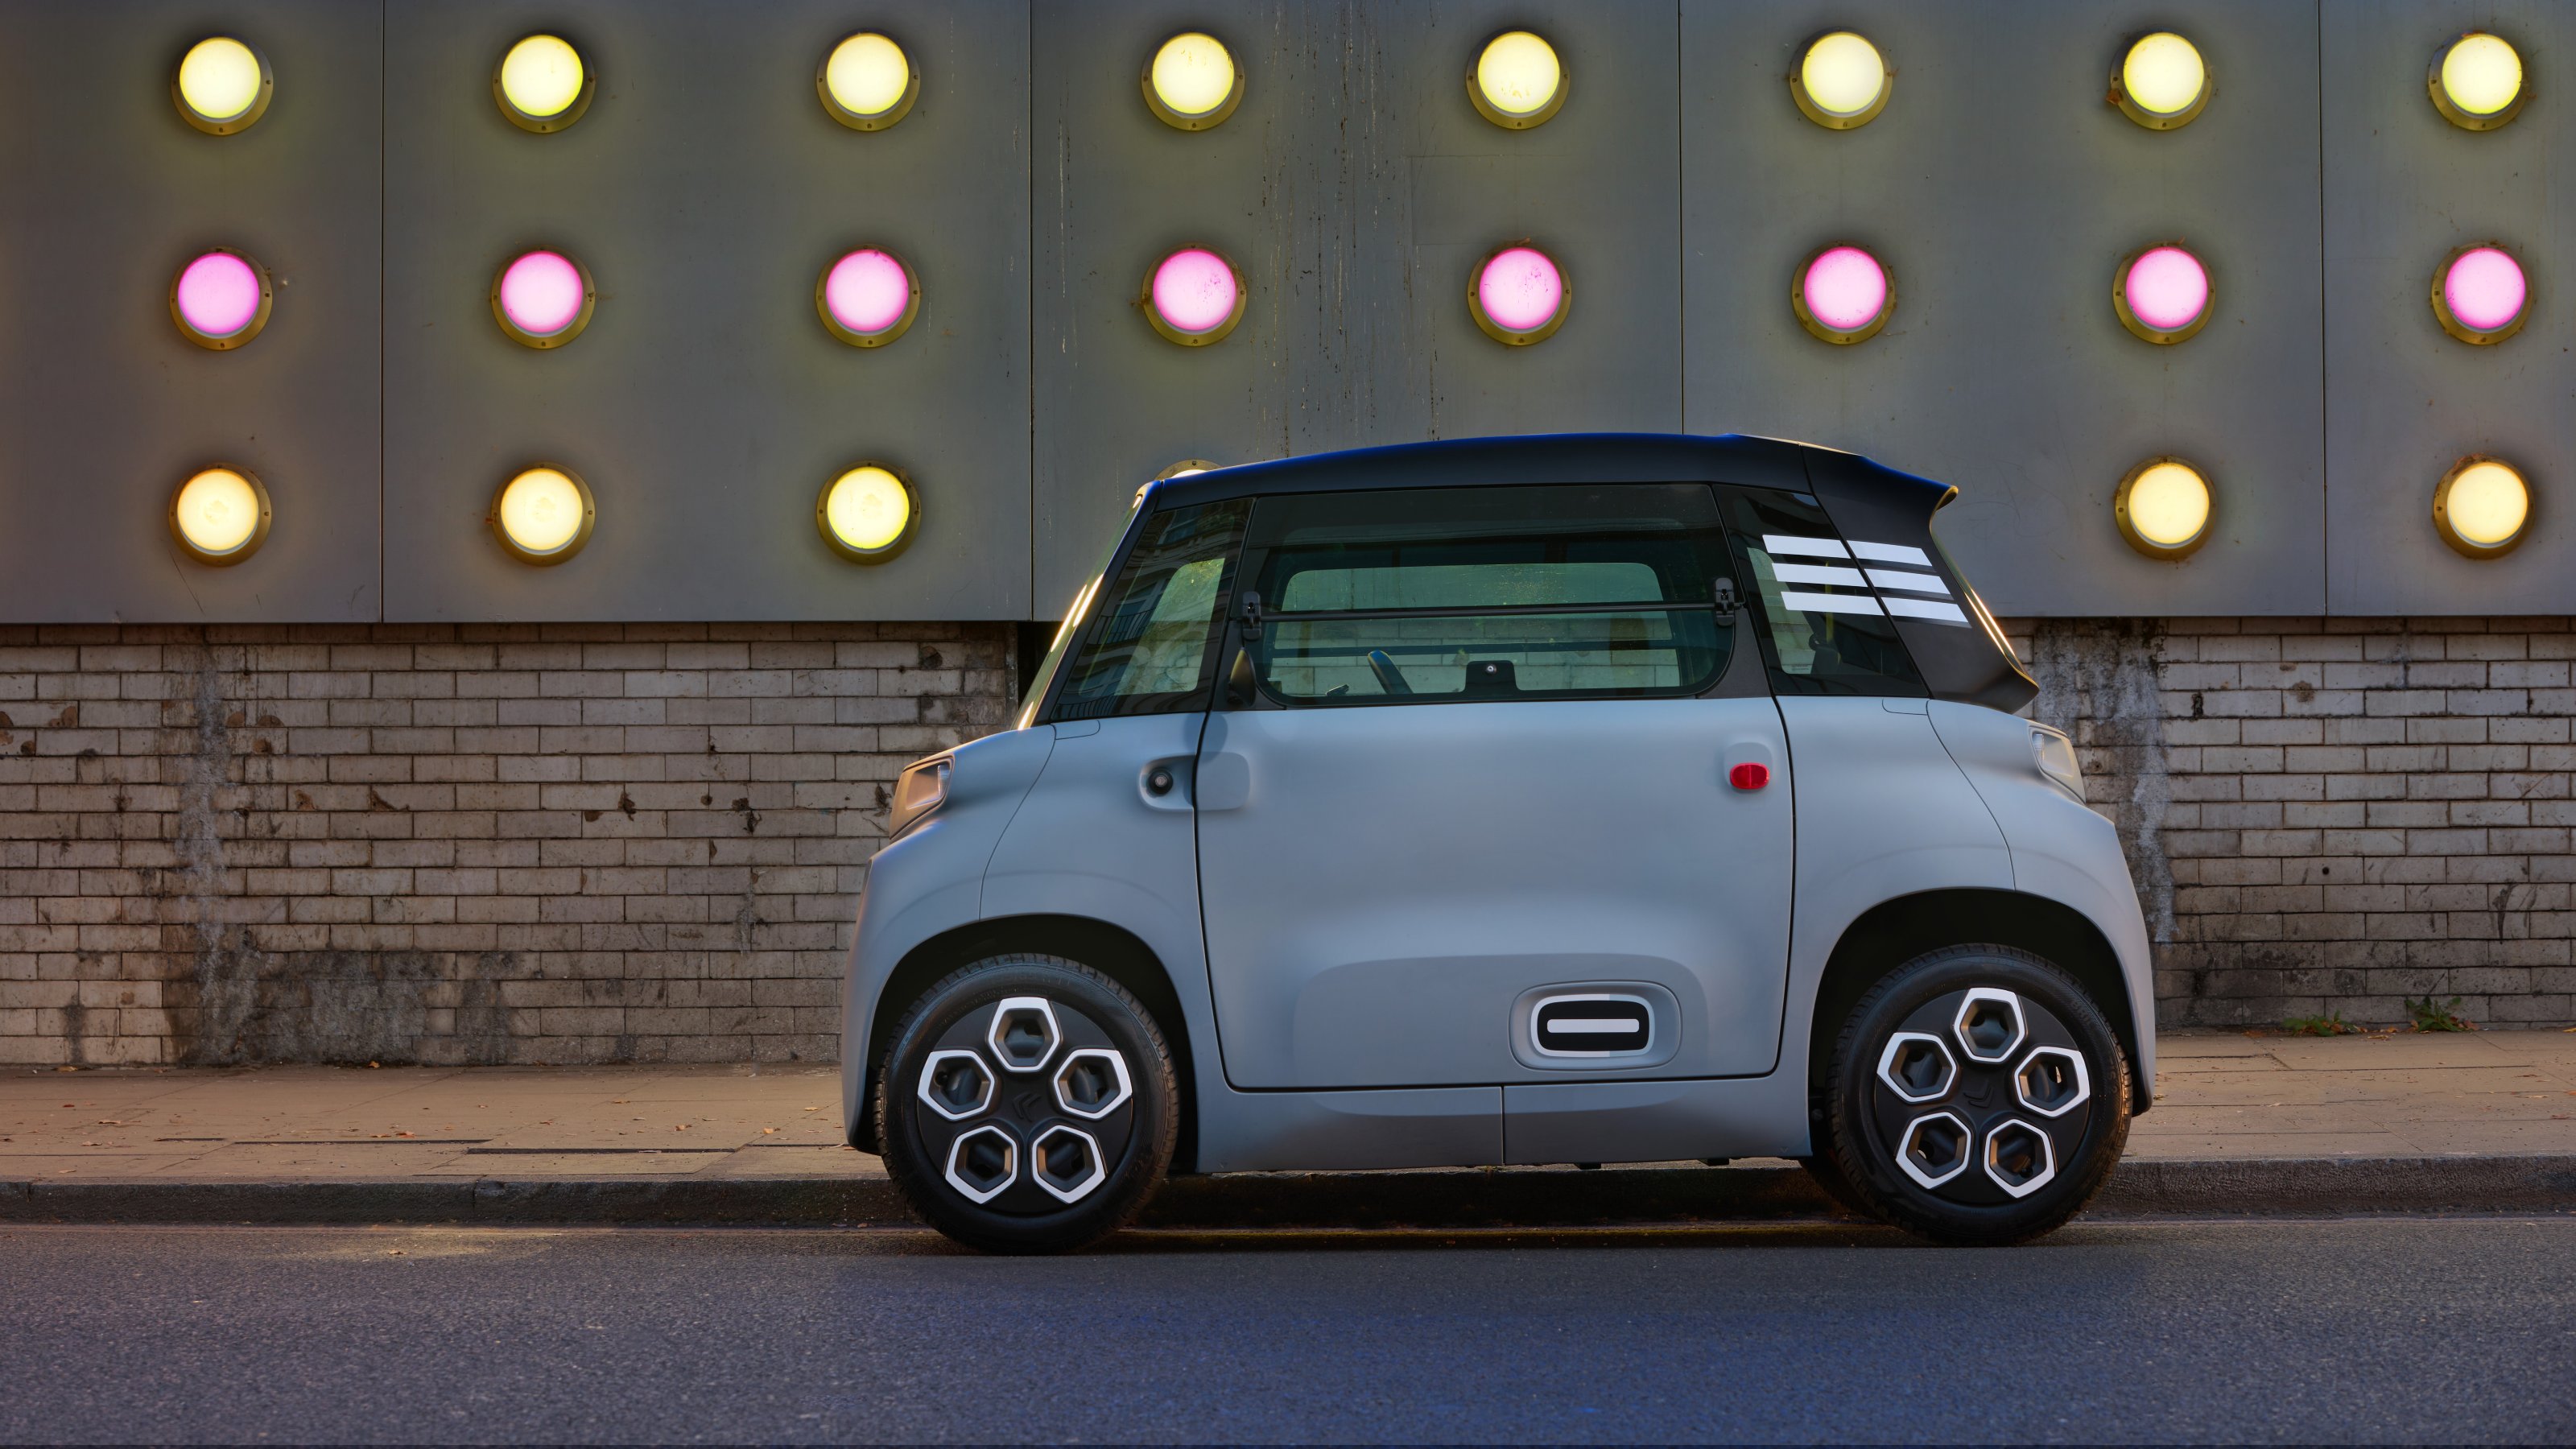 Citroën Ami: Wallpaper* takes a trip in the tiny two-seater